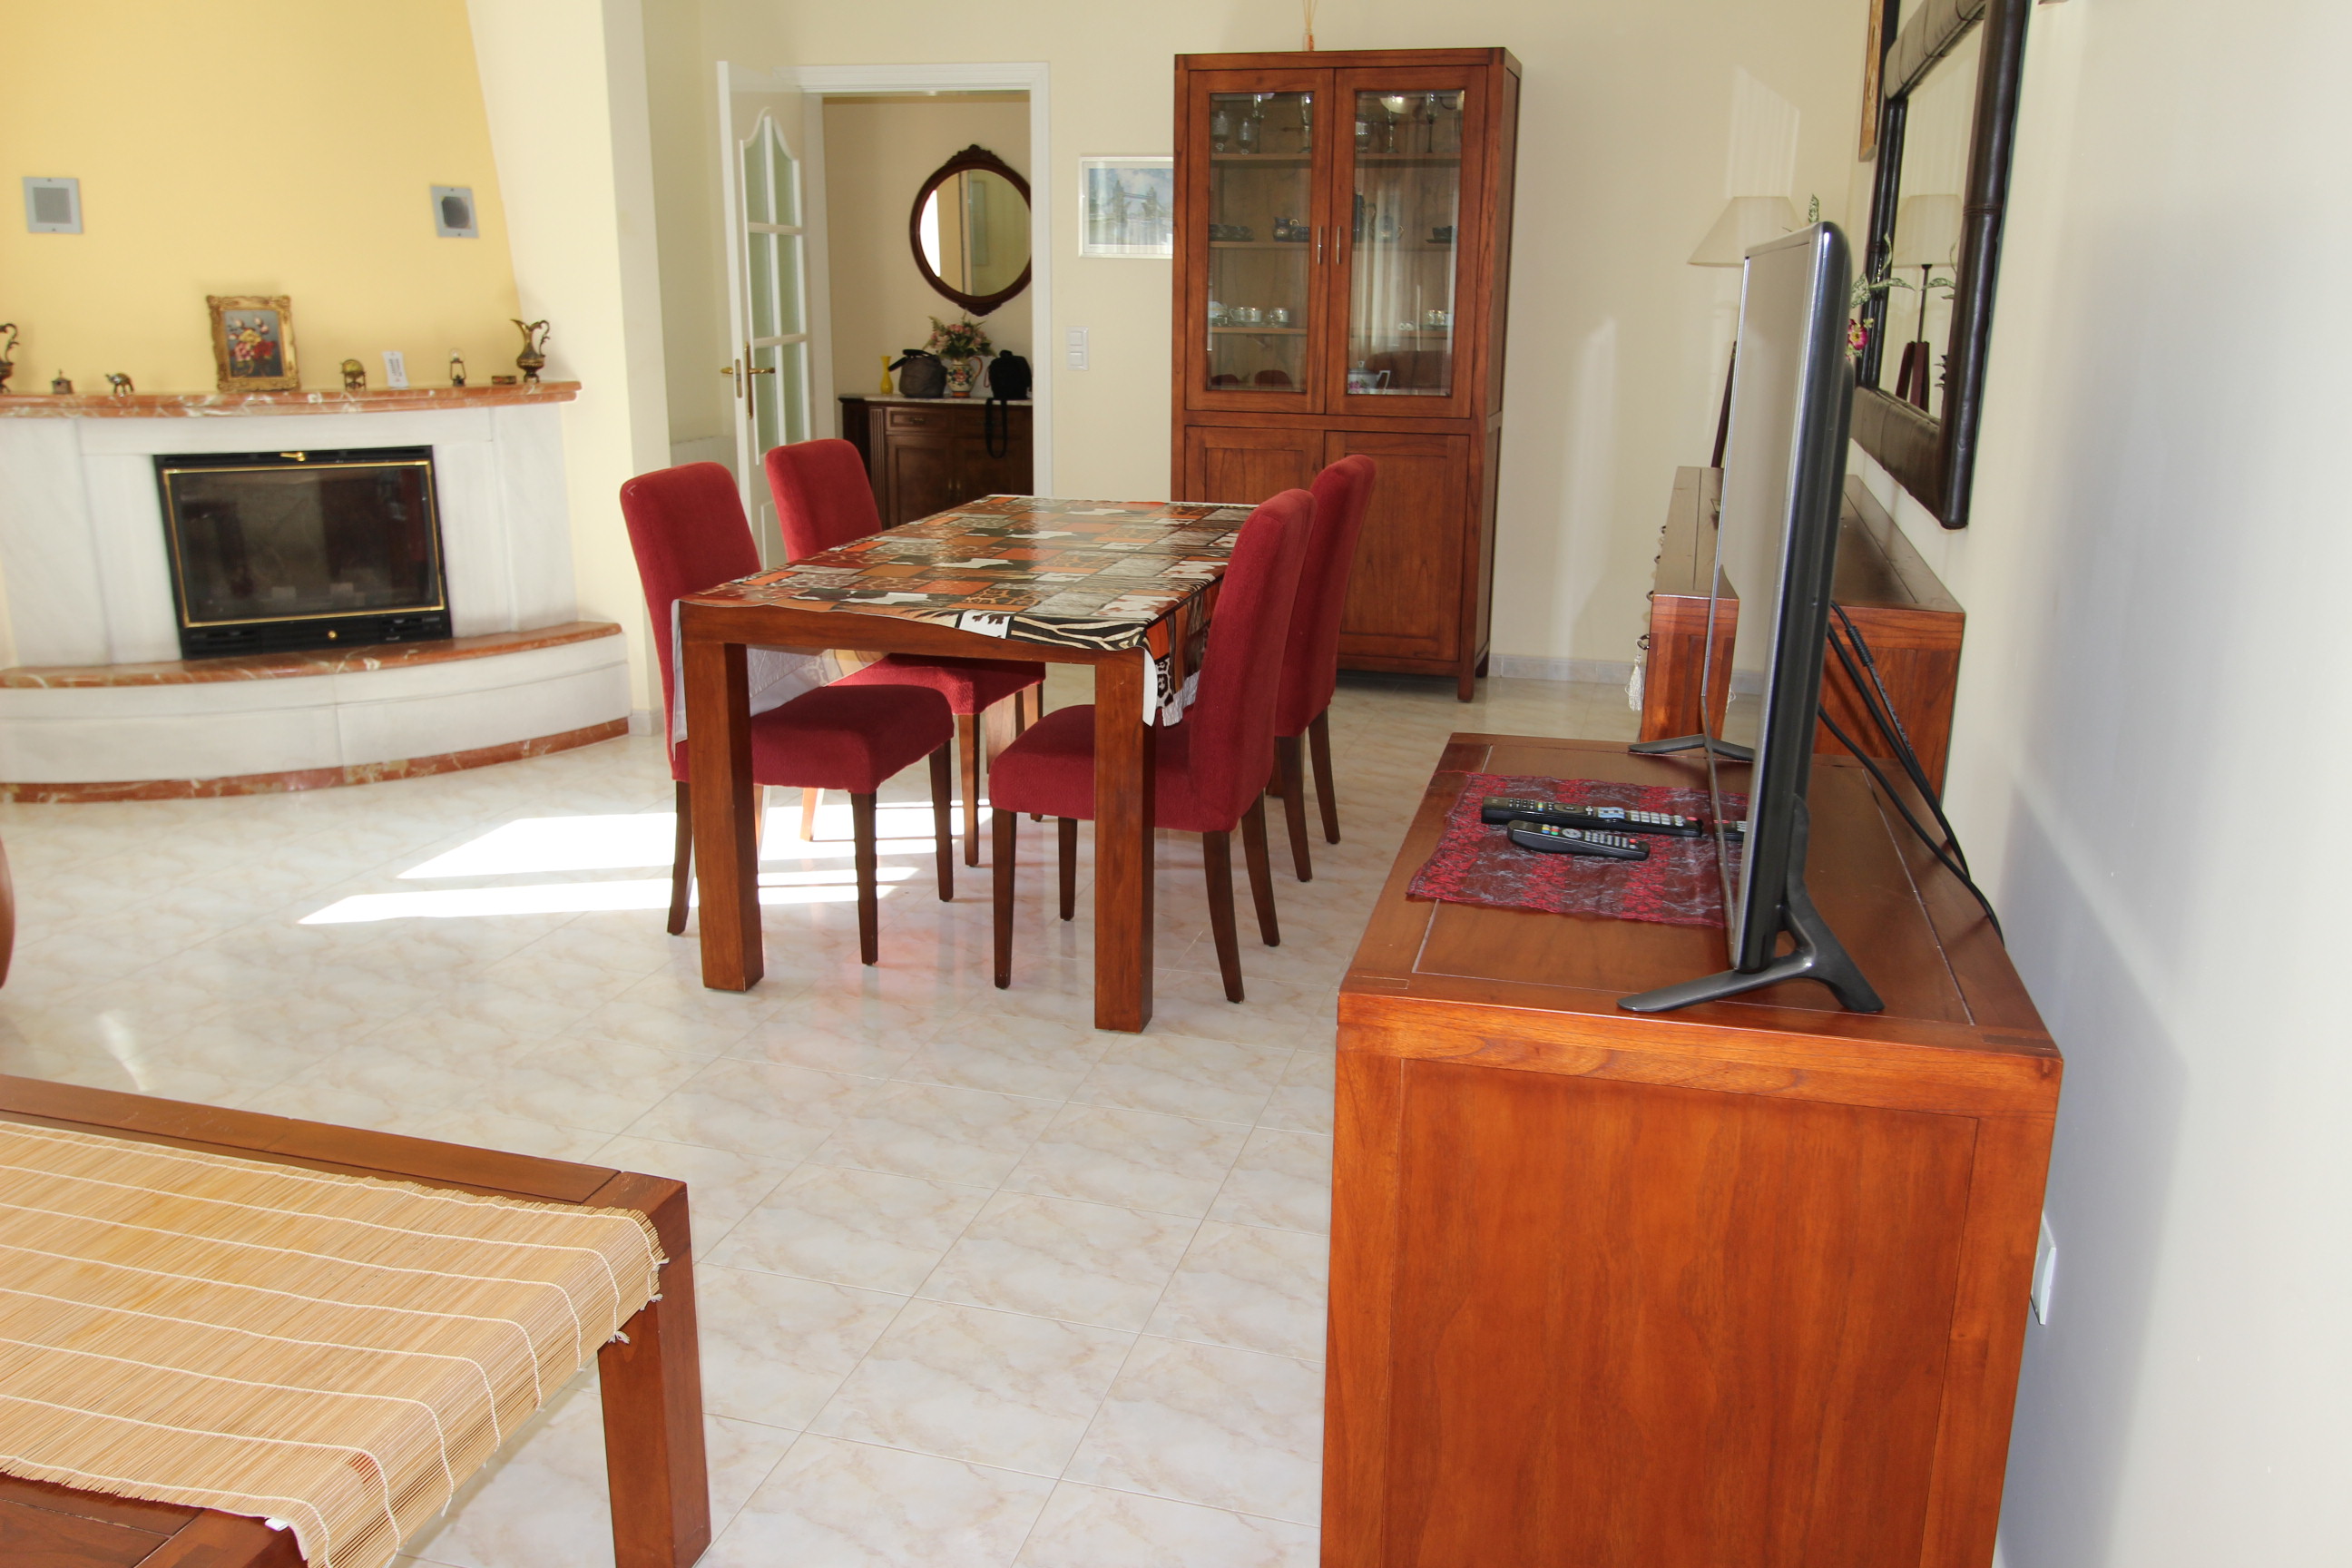 VILLA VERY CLOSE TO THE BEACH AND SUPERMARKETS